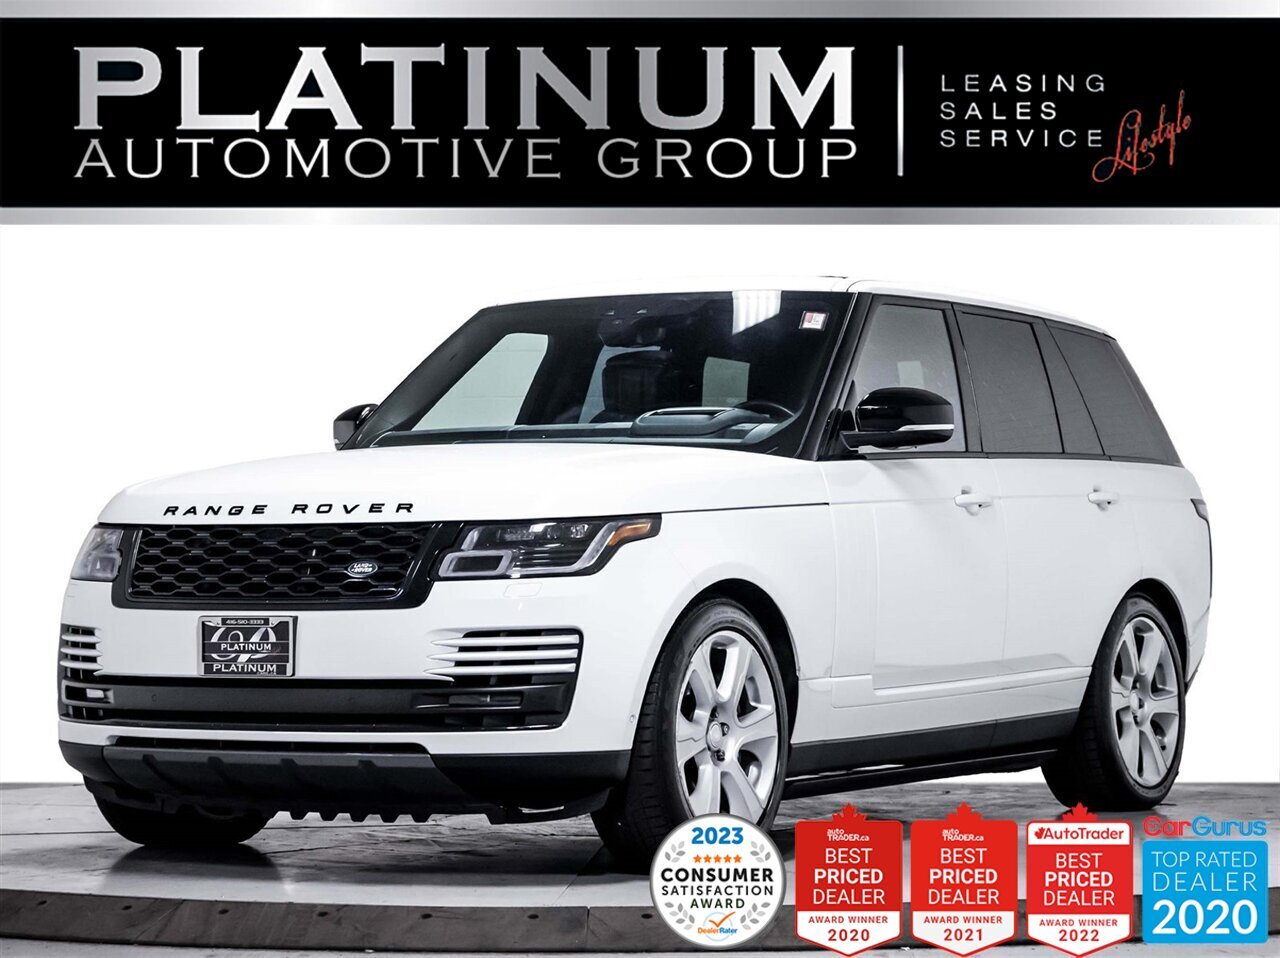 2019 Land Rover Range Rover SUPERCHARGED, V8, 518HP, NAV, PANO, MERIDIAN, CAM